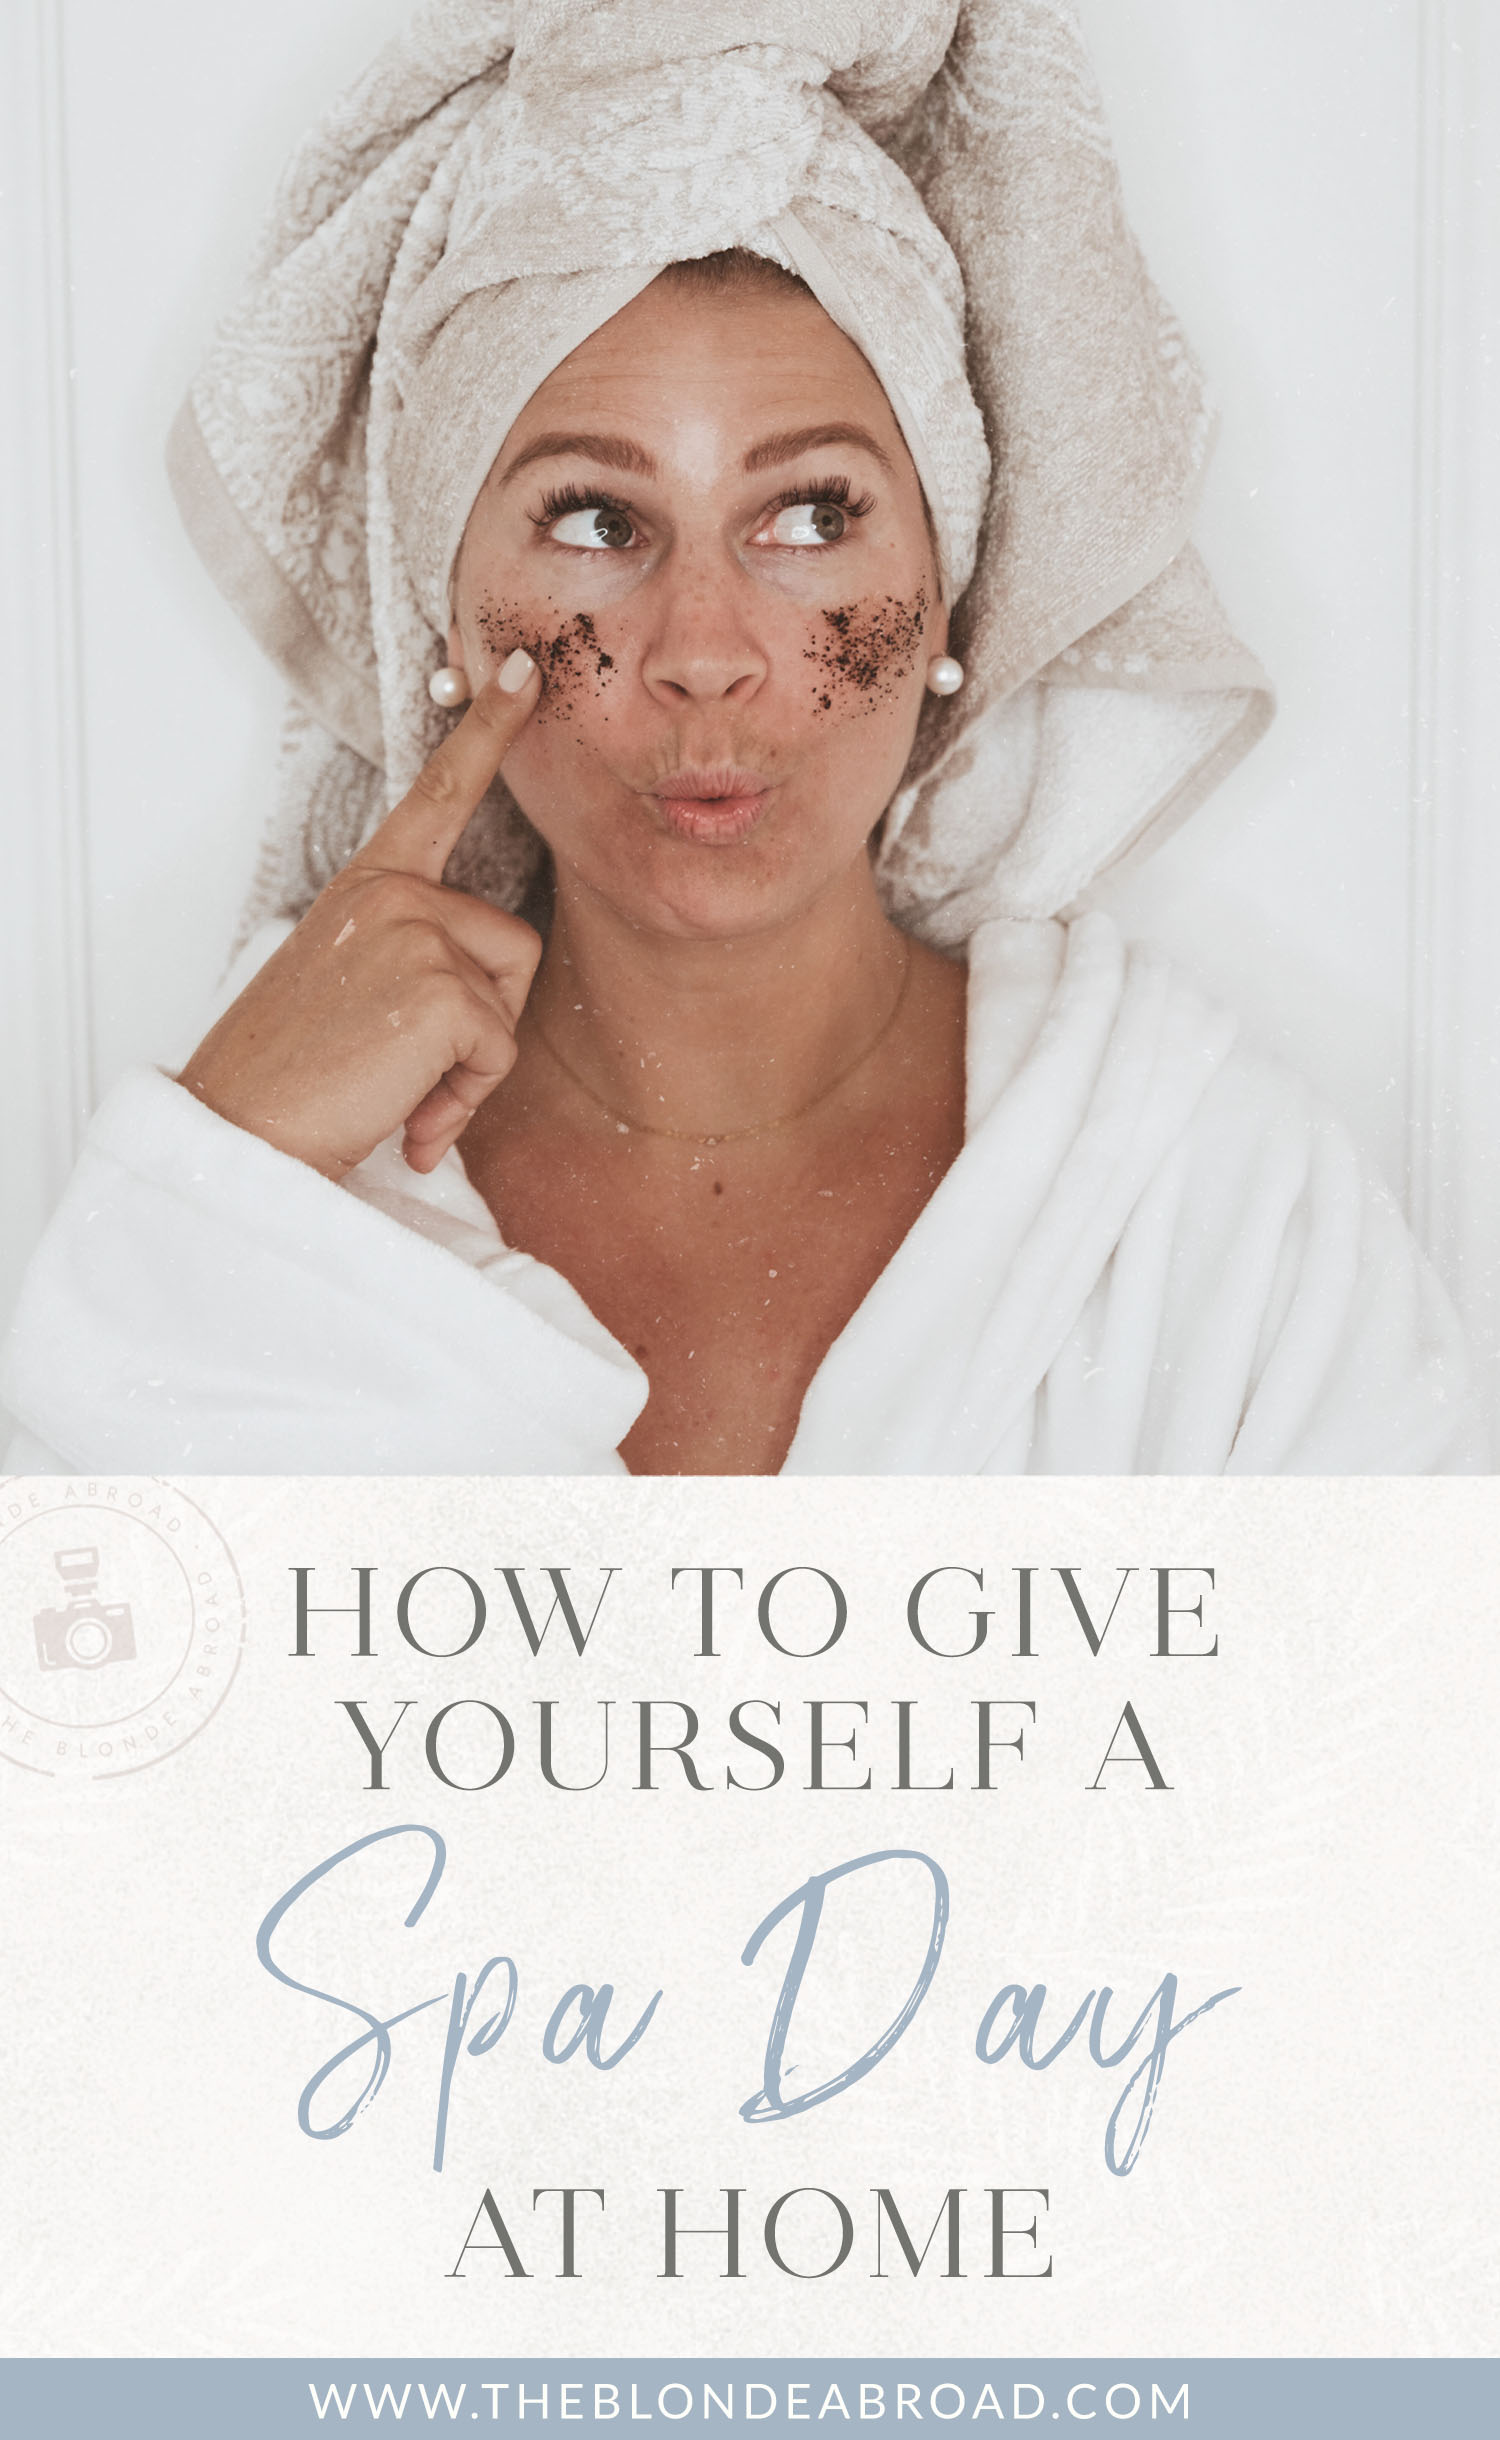 How to Give Yourself a Spa Day at Home